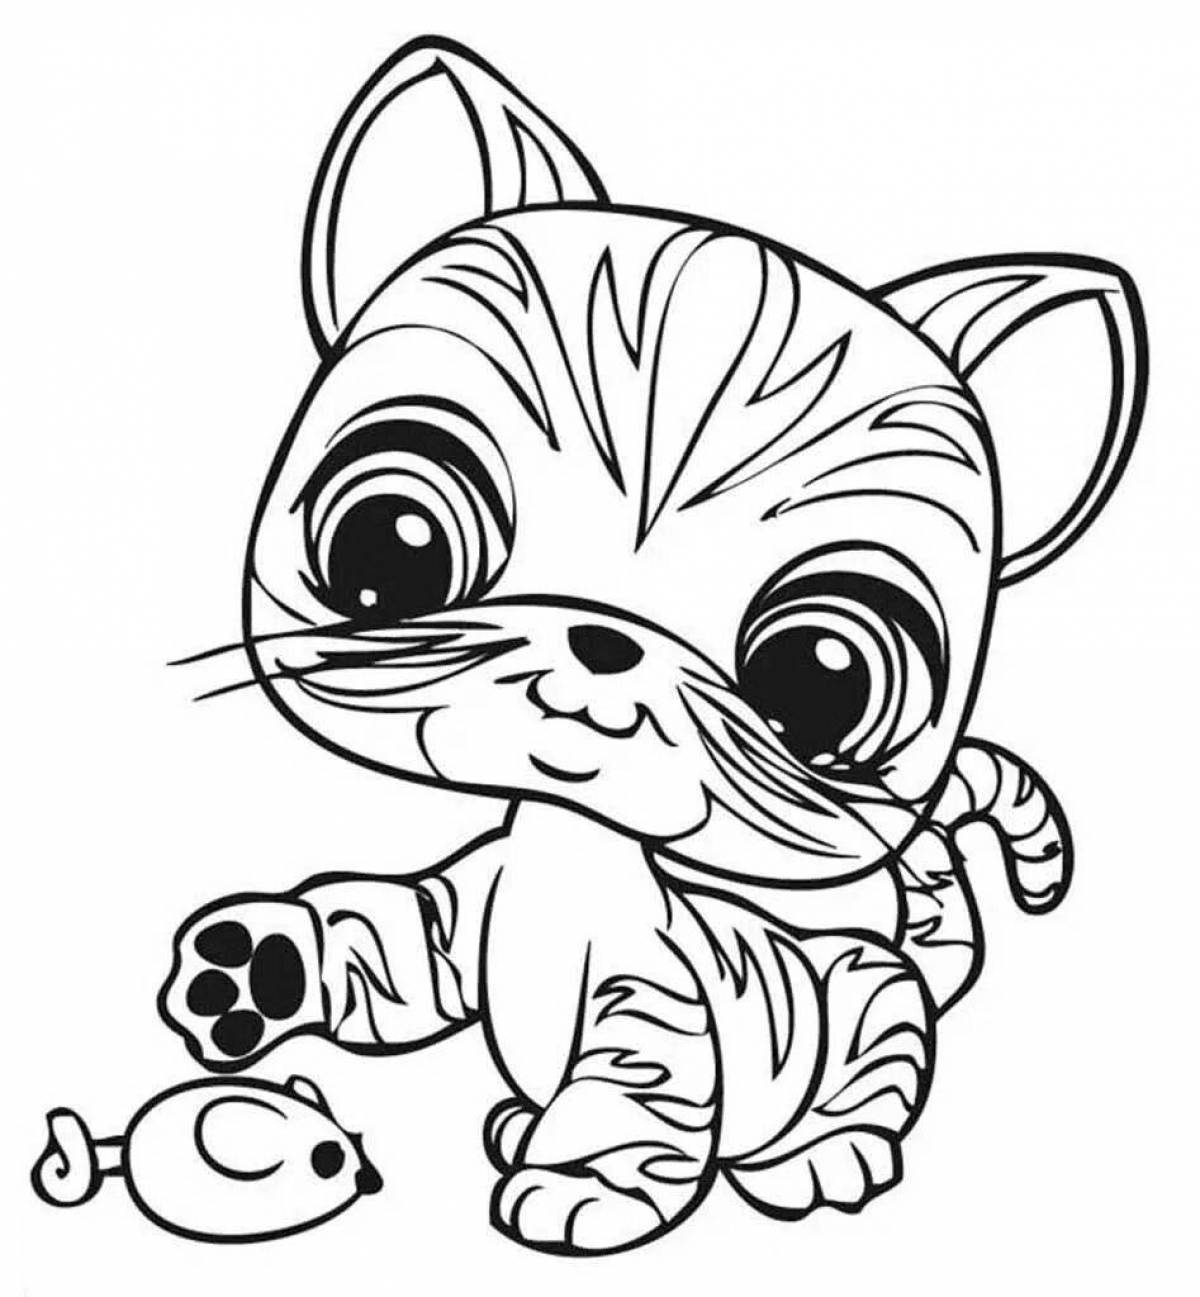 Charming coloring cute kittens